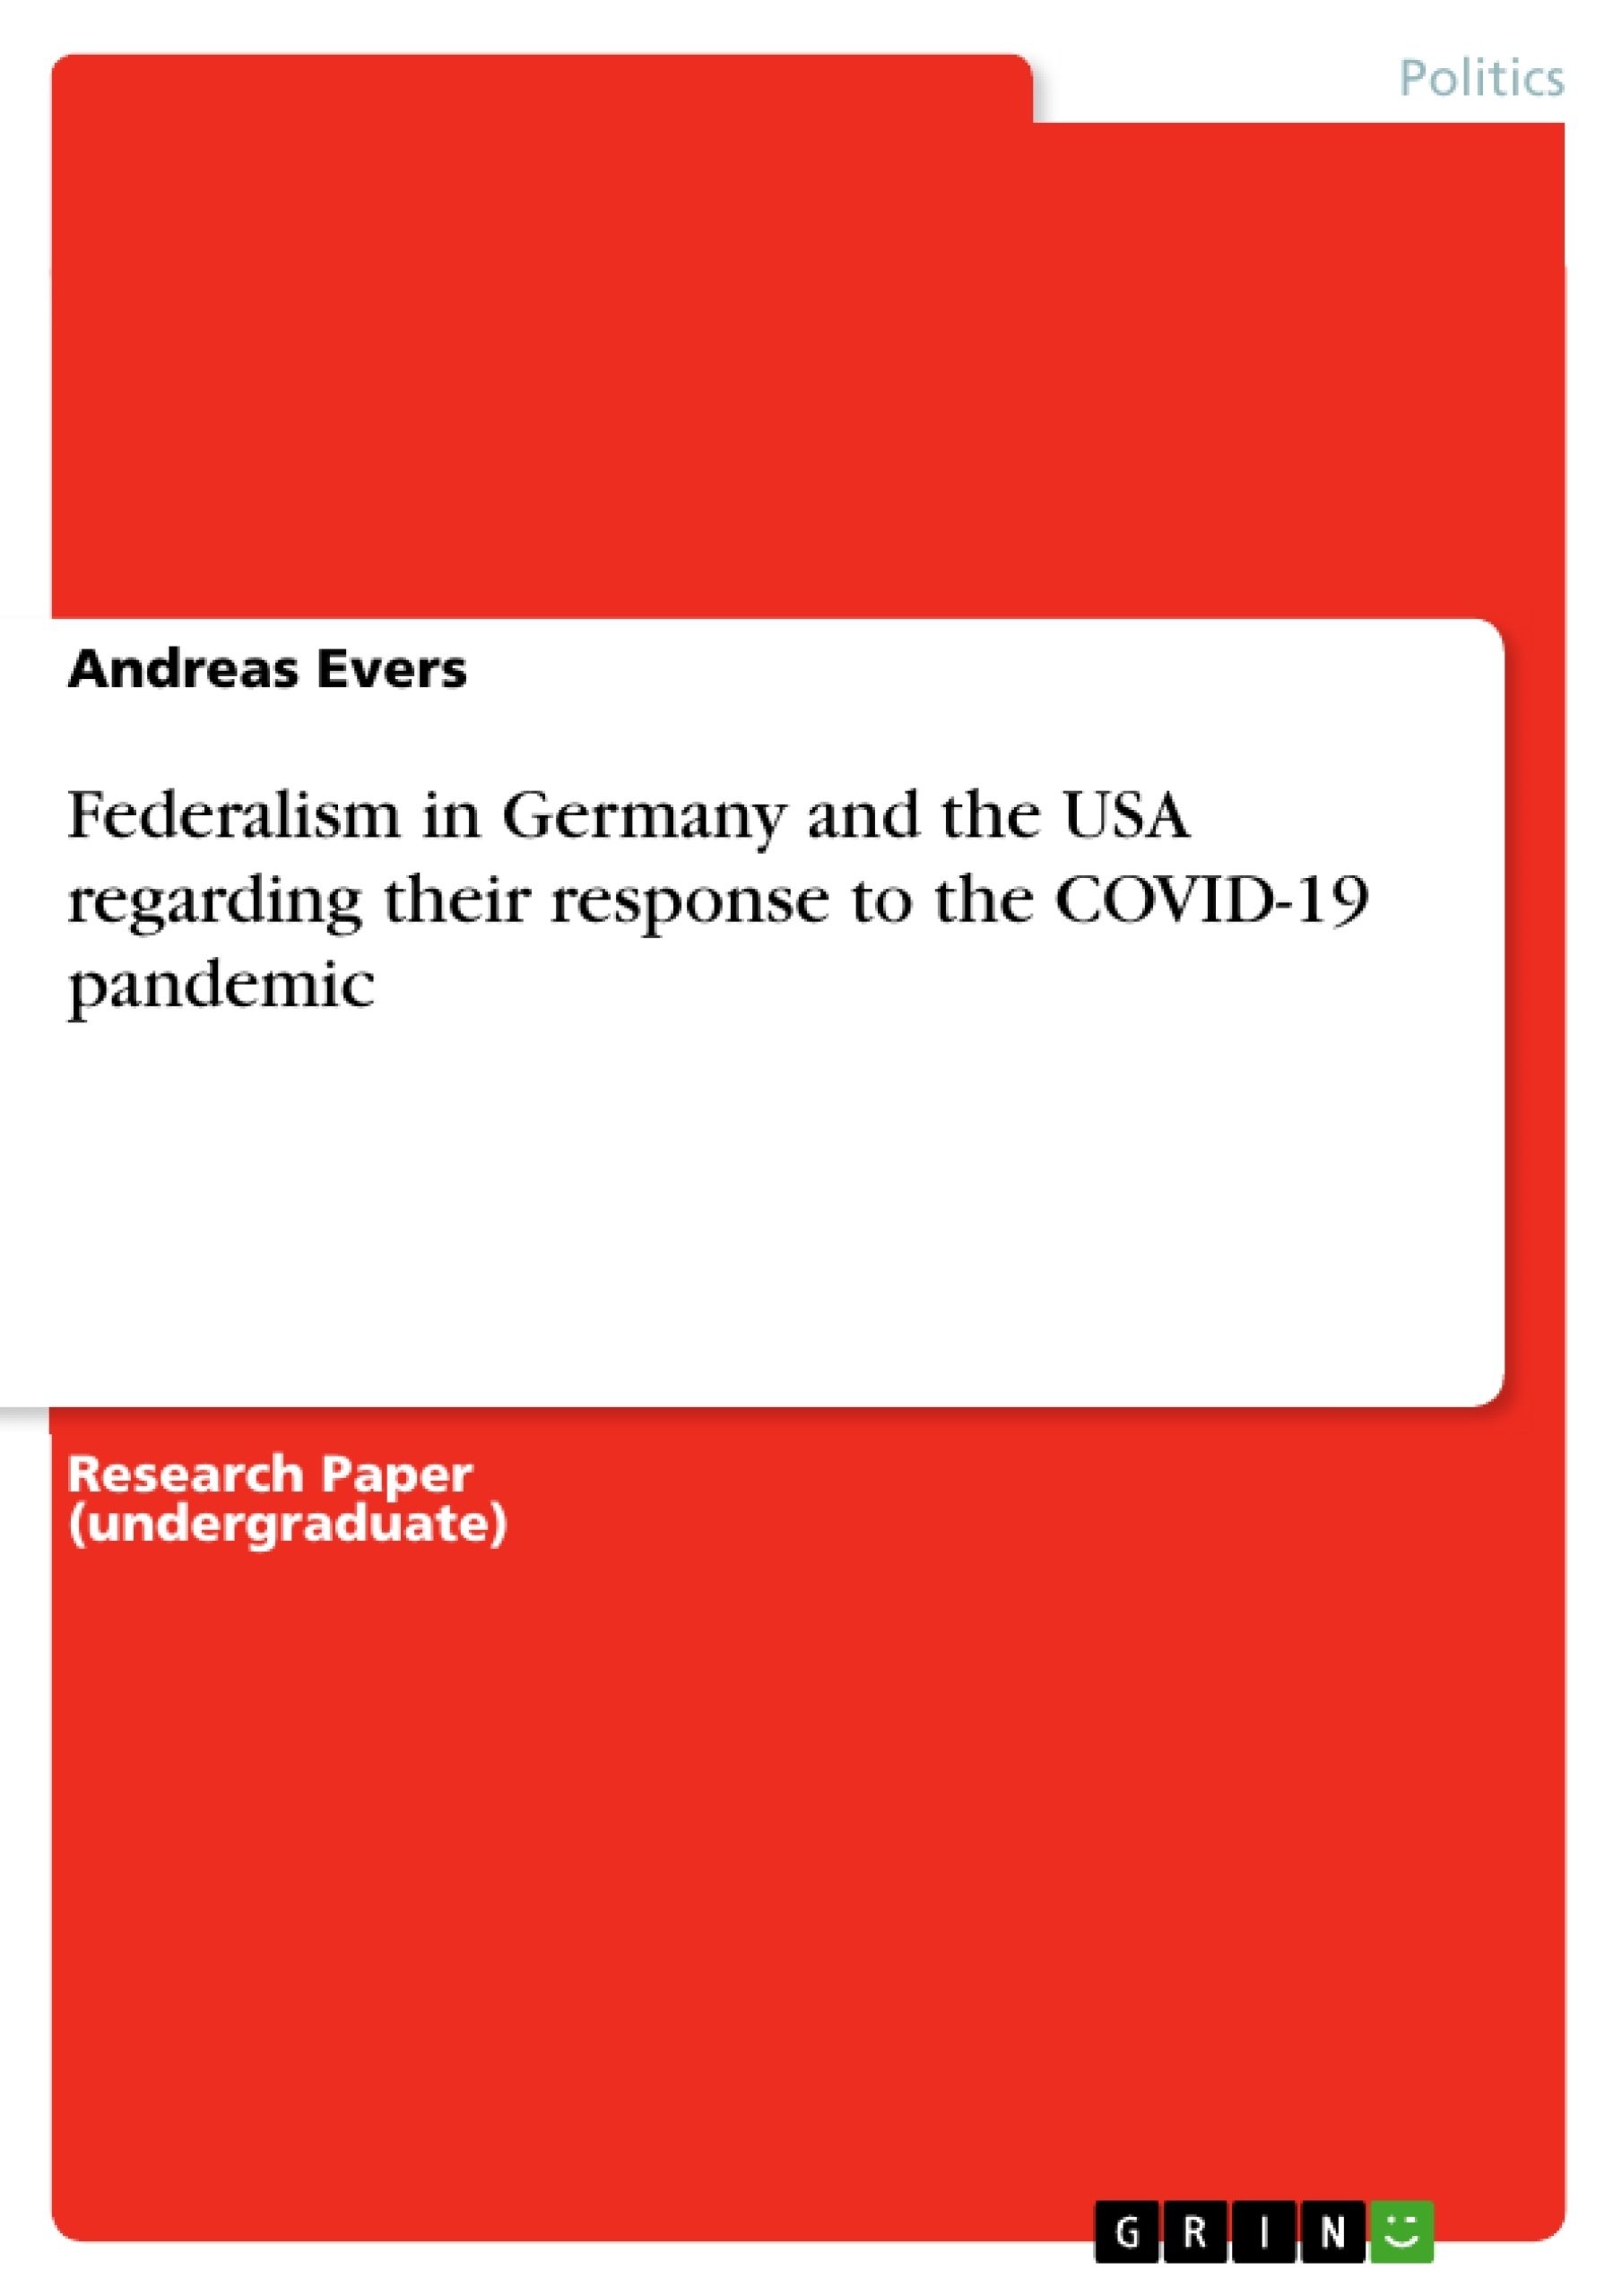 Title: Federalism in Germany and the USA regarding their response to the COVID-19 pandemic